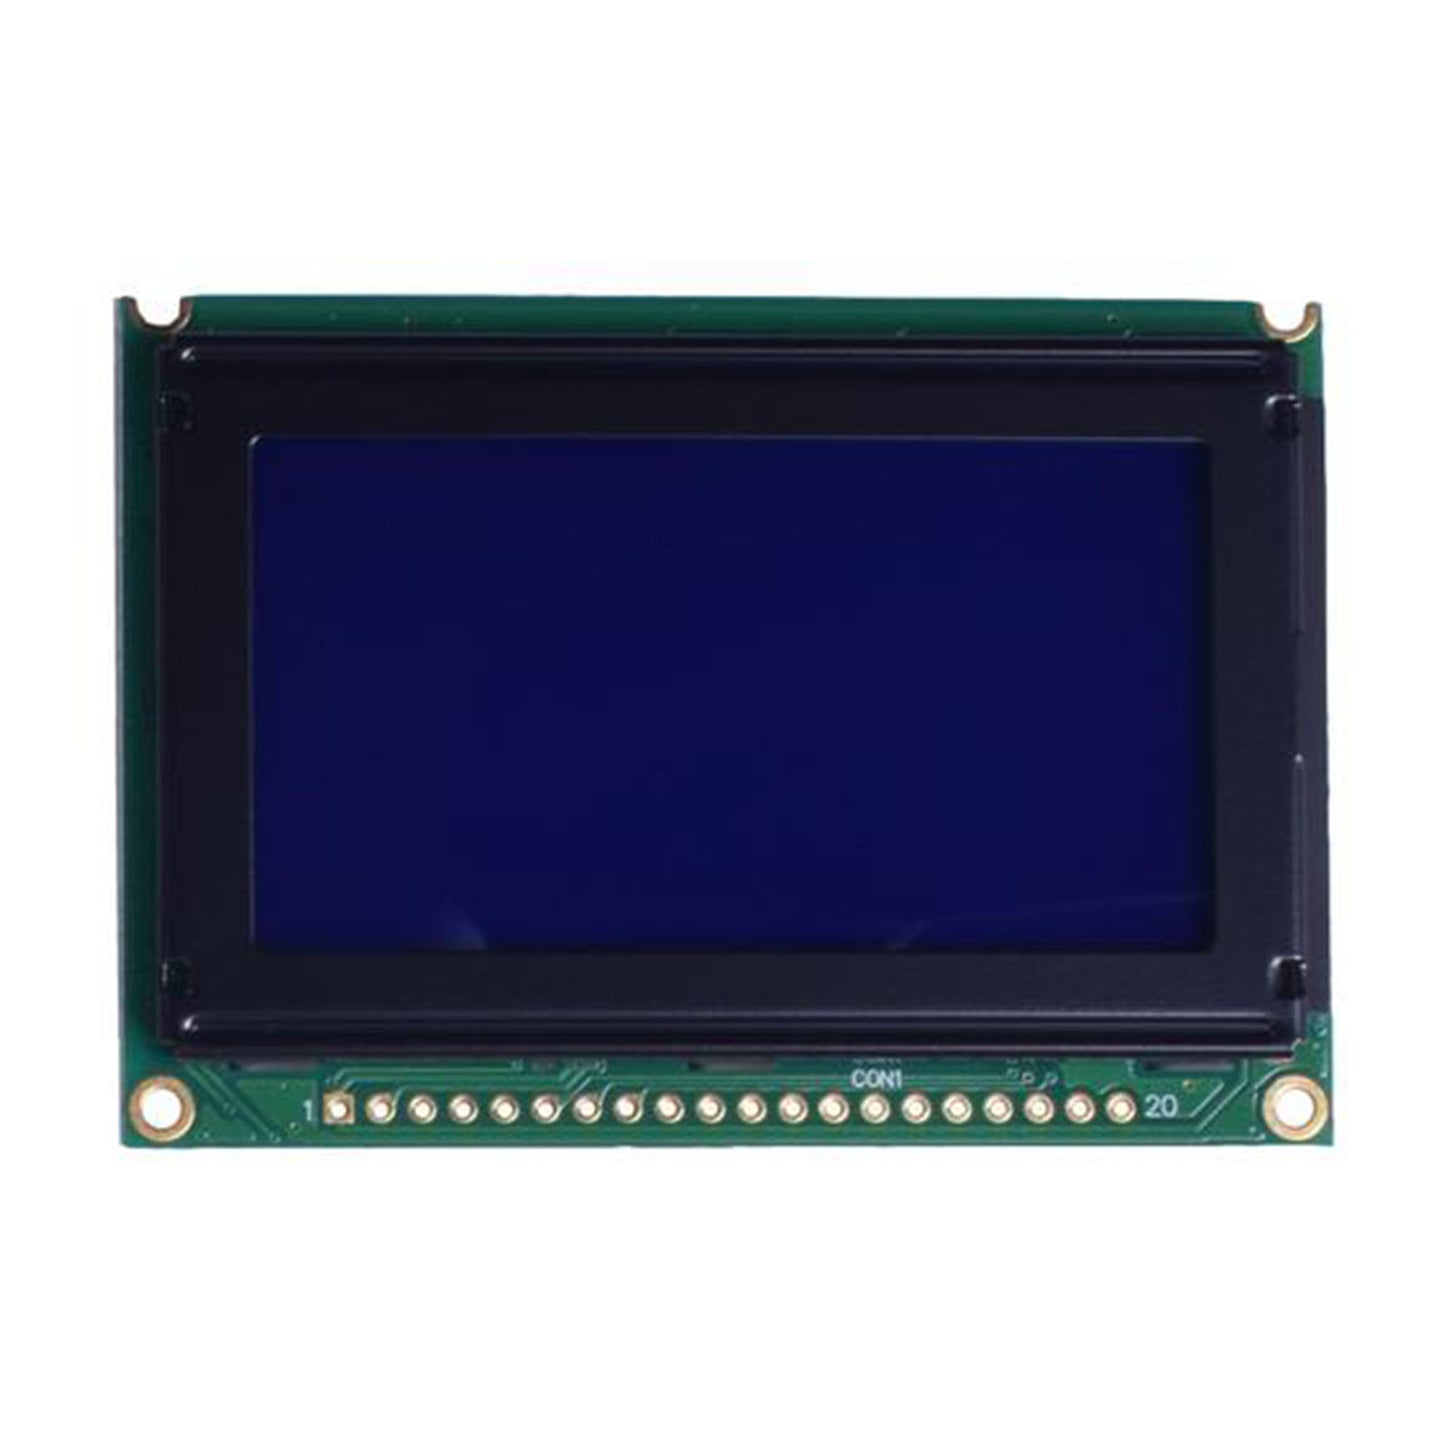 128x64 LCD 2.62 inch graphic blue display module with MCU interface